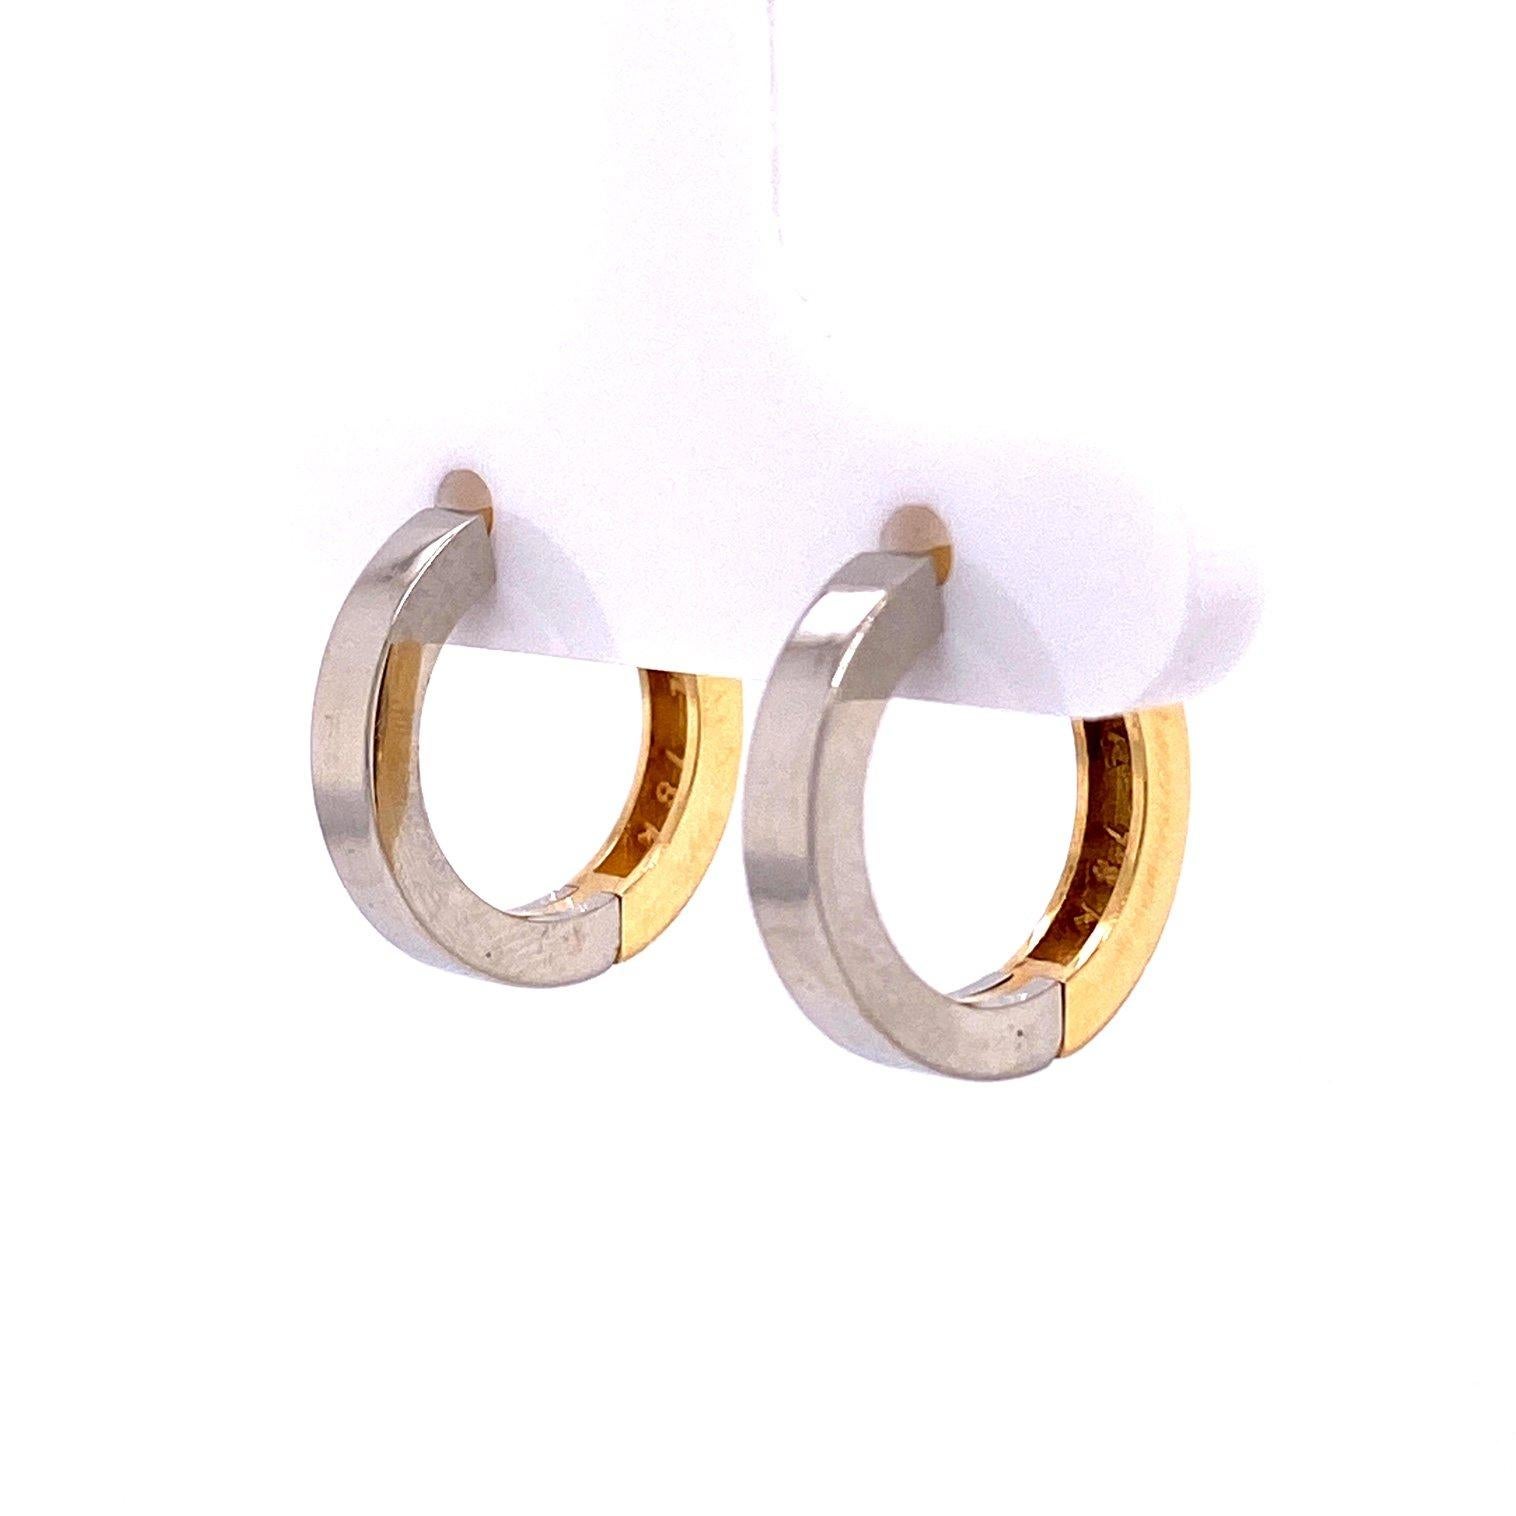 Uncut 18k Yellow and White Gold Huggie Hoops with Peach Druzy Wing Jackets For Sale